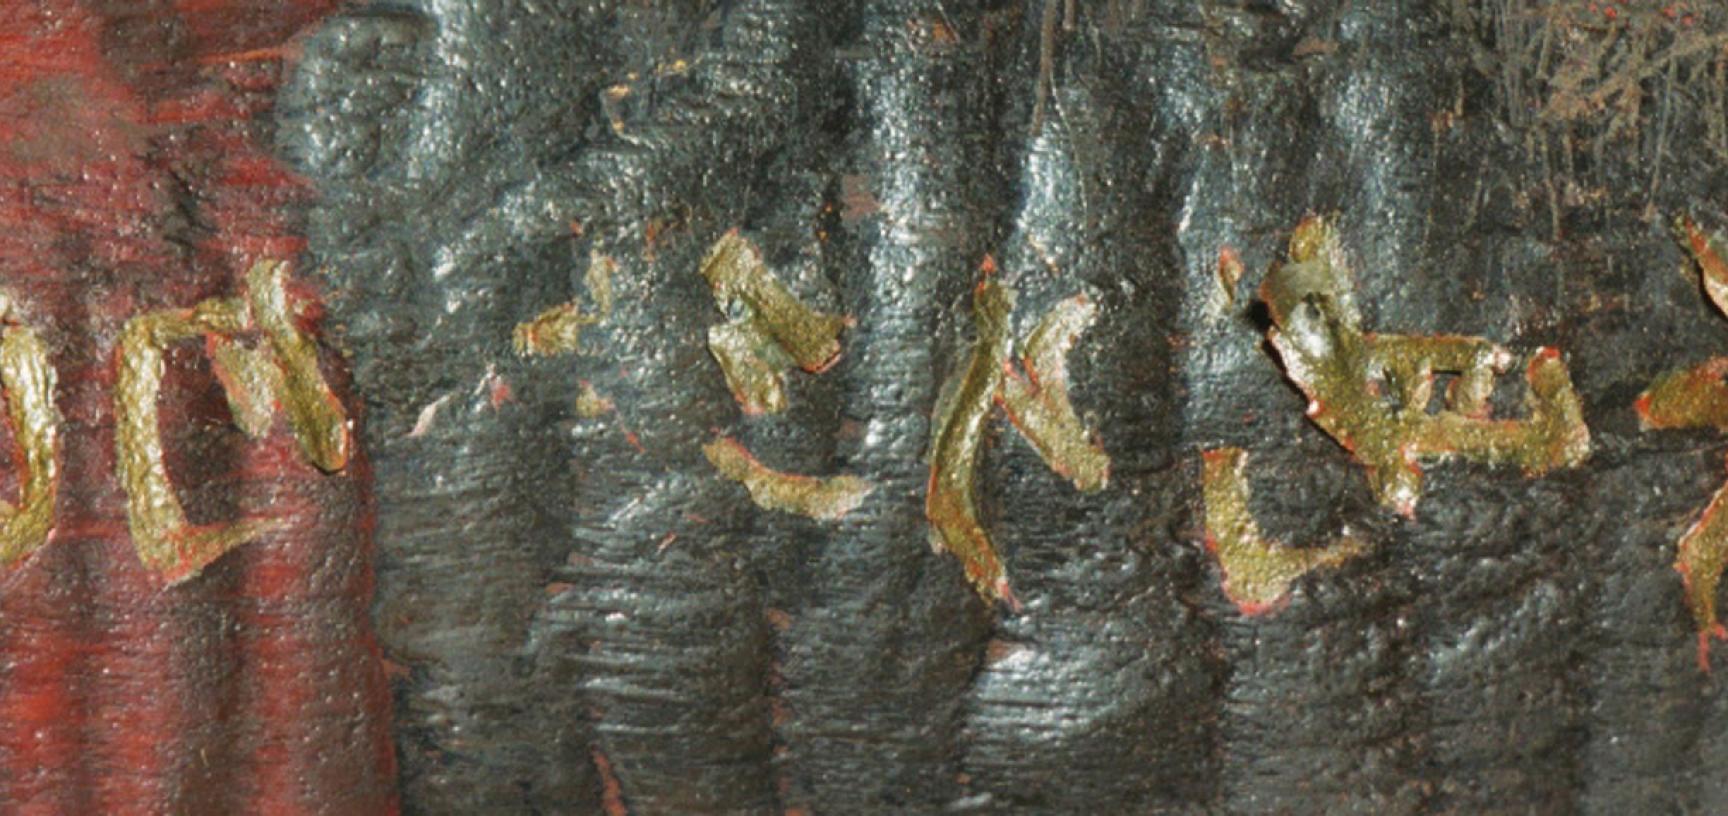 Signature on mask (1184.114.49) before conservation